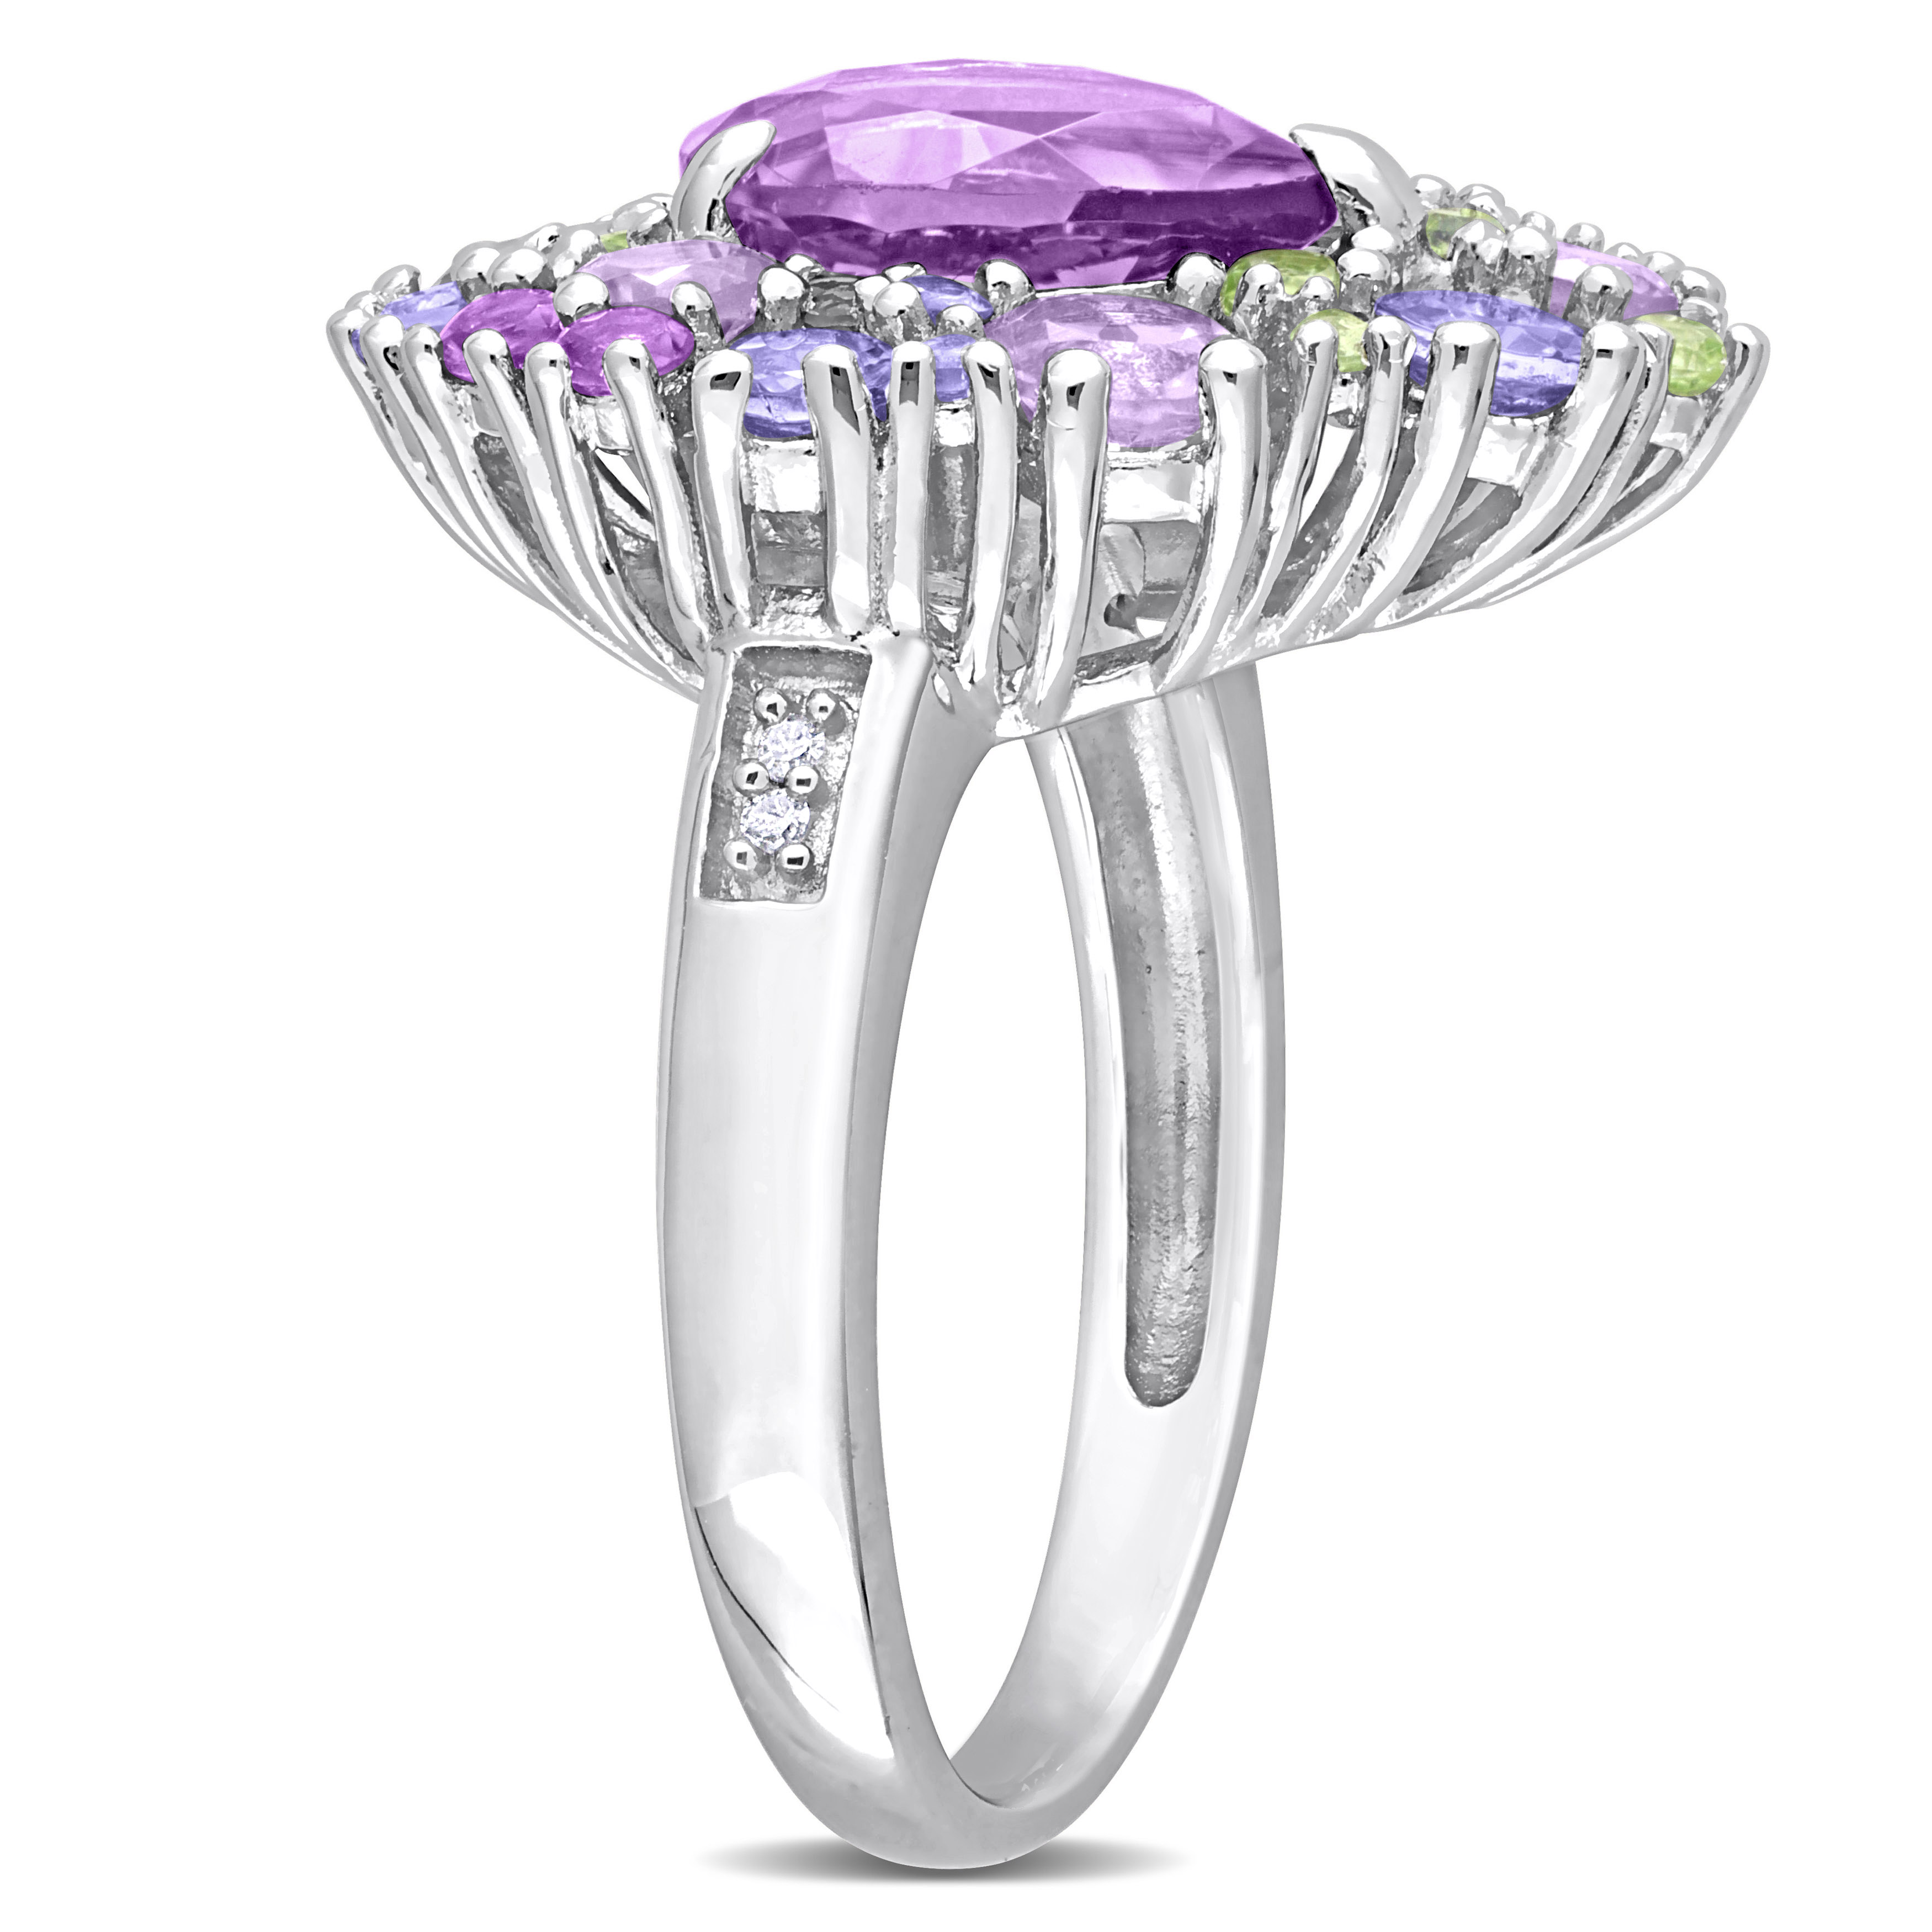 4 1/2 CT TGW Tanzanite, Rose de France, Peridot and Amethyst Pear-shape Cluster Cocktail Ring in Sterling Silver